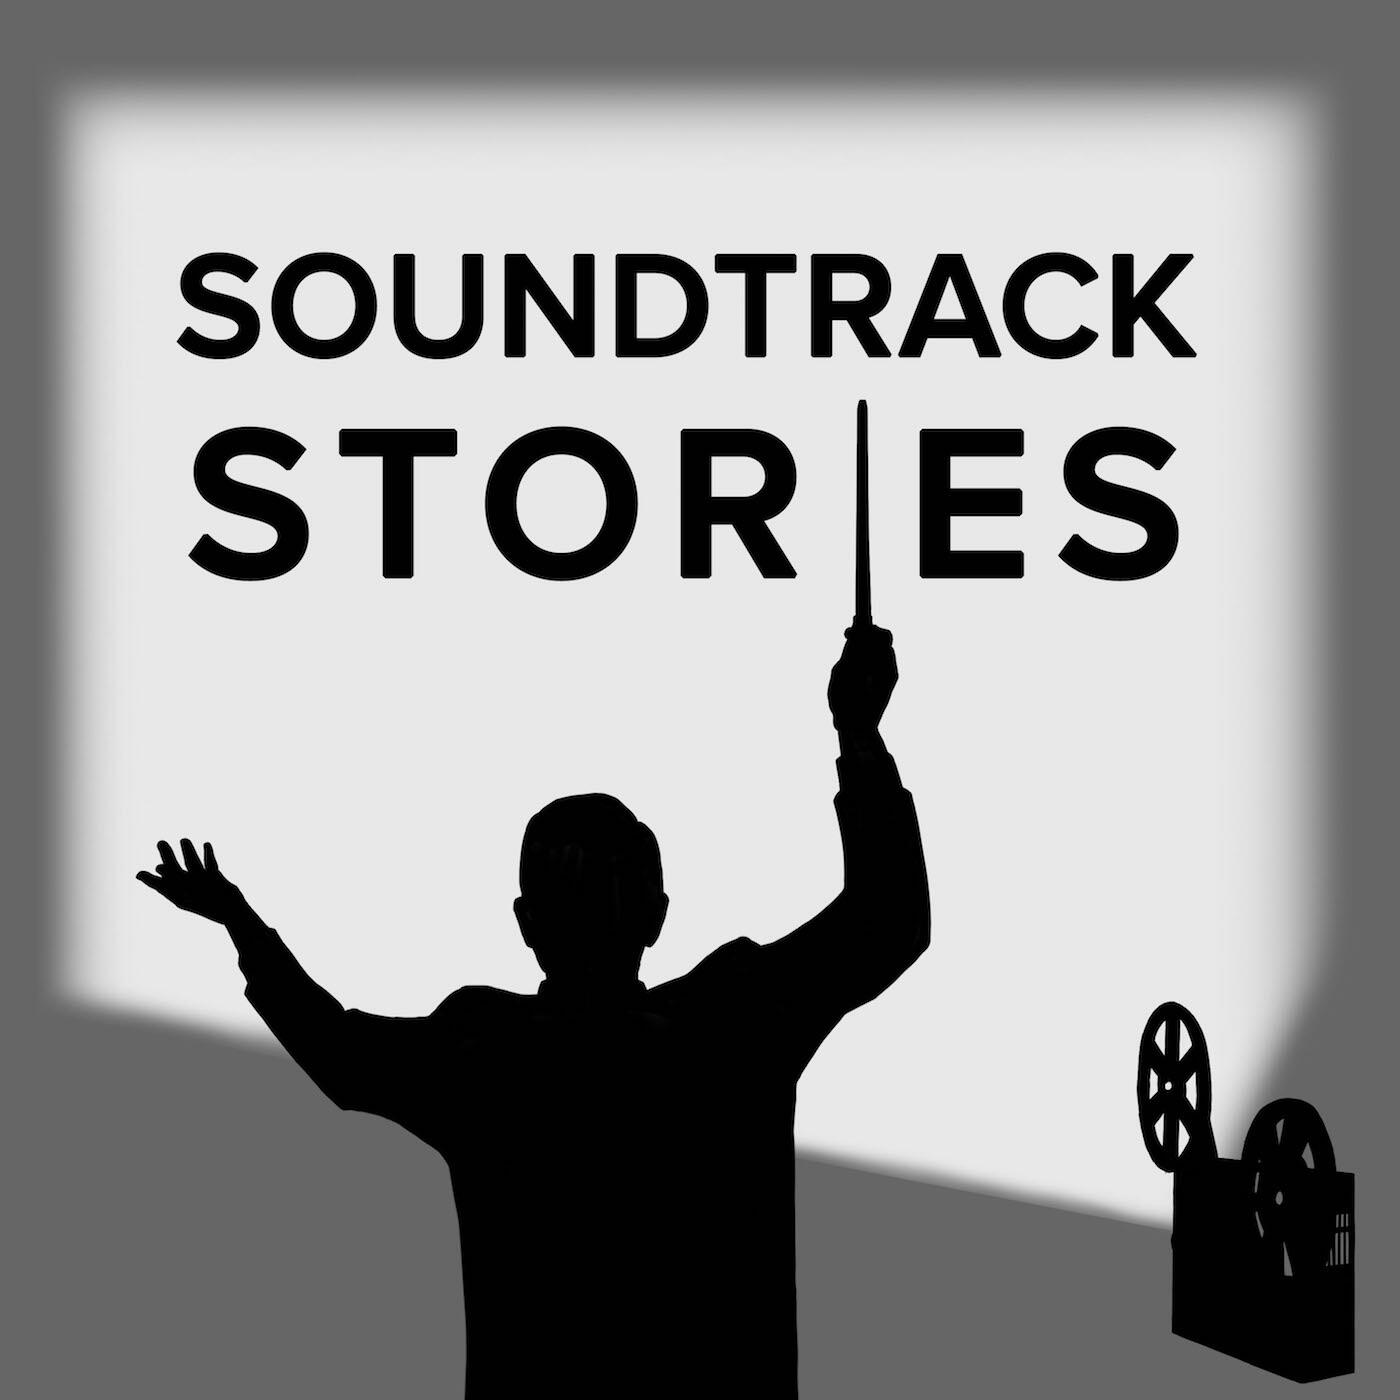 Story soundtrack. Listen to a story picture.